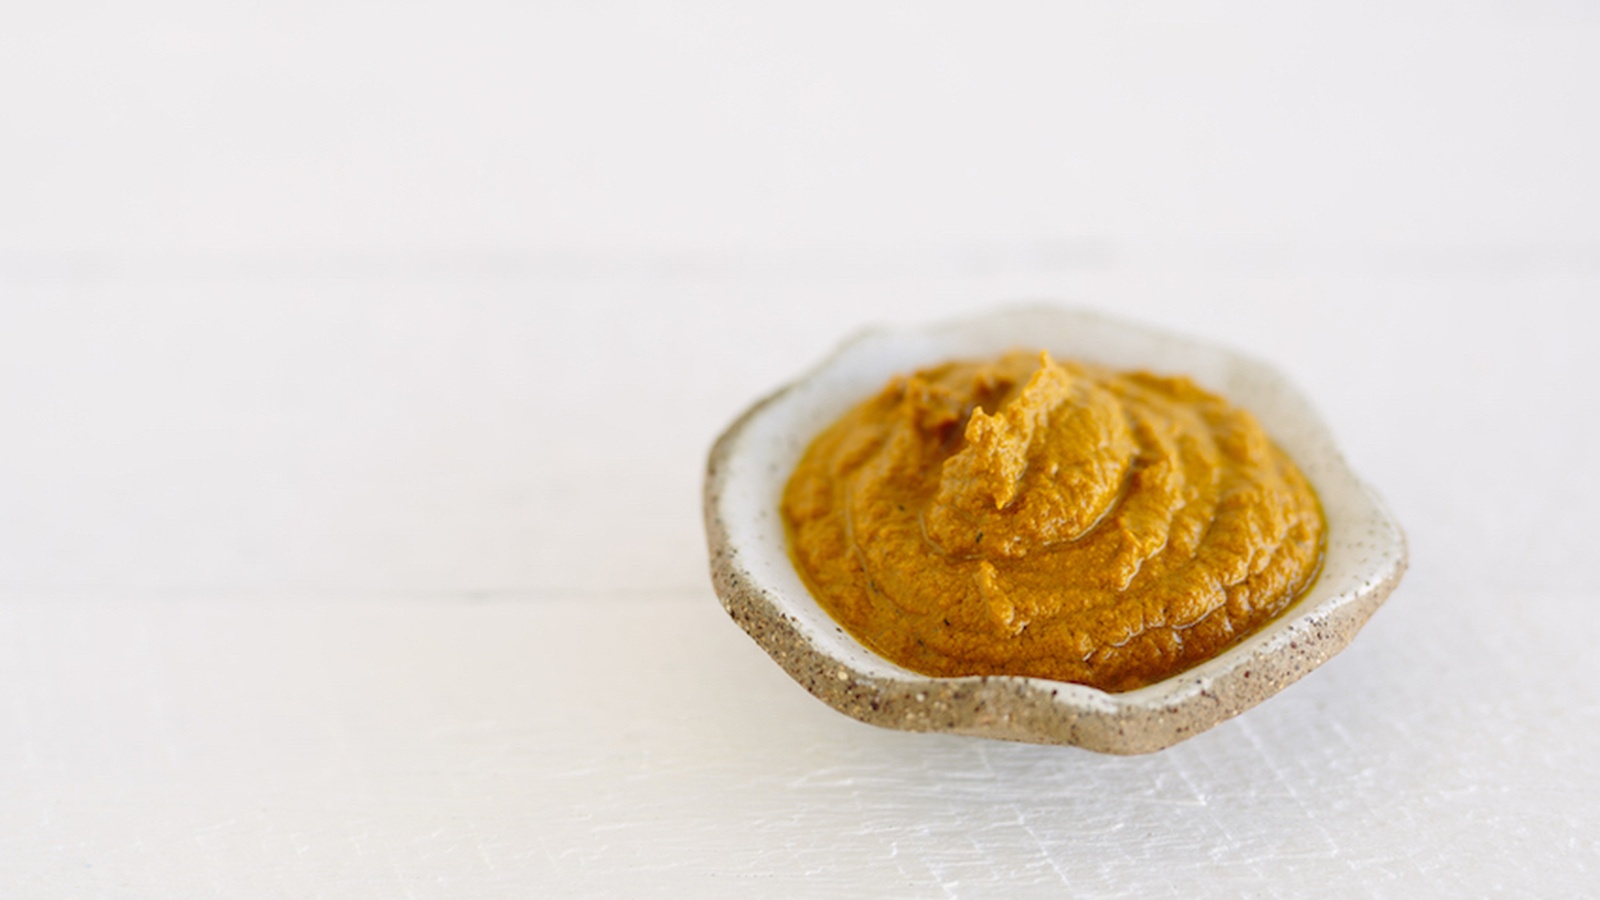 How to Make Golden Paste: The Anti-Inflammatory Dip You Can Put On Literally Anything